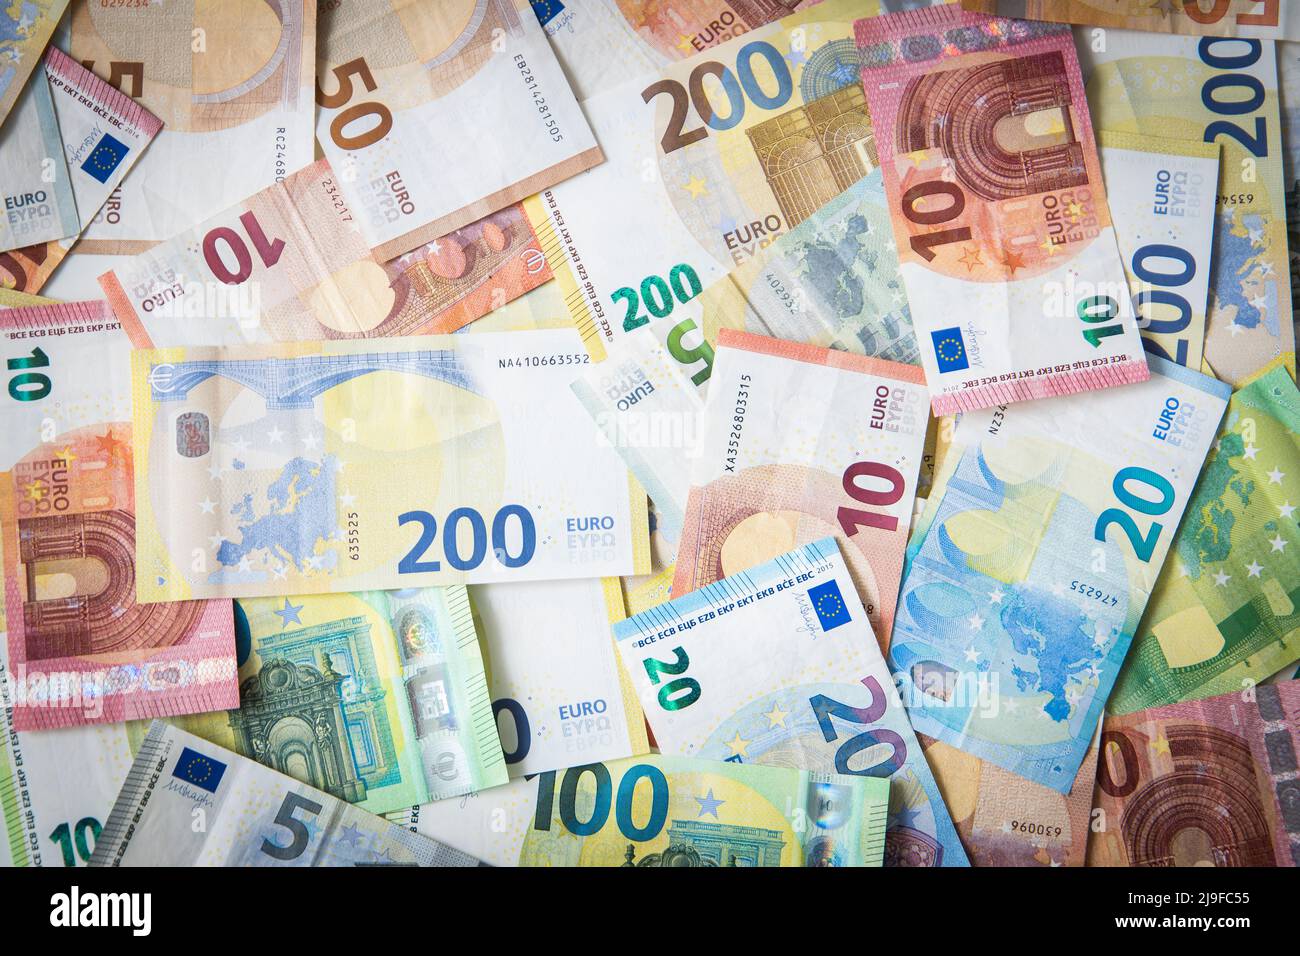 Lots of different Euro banknotes shown as a mess Stock Photo